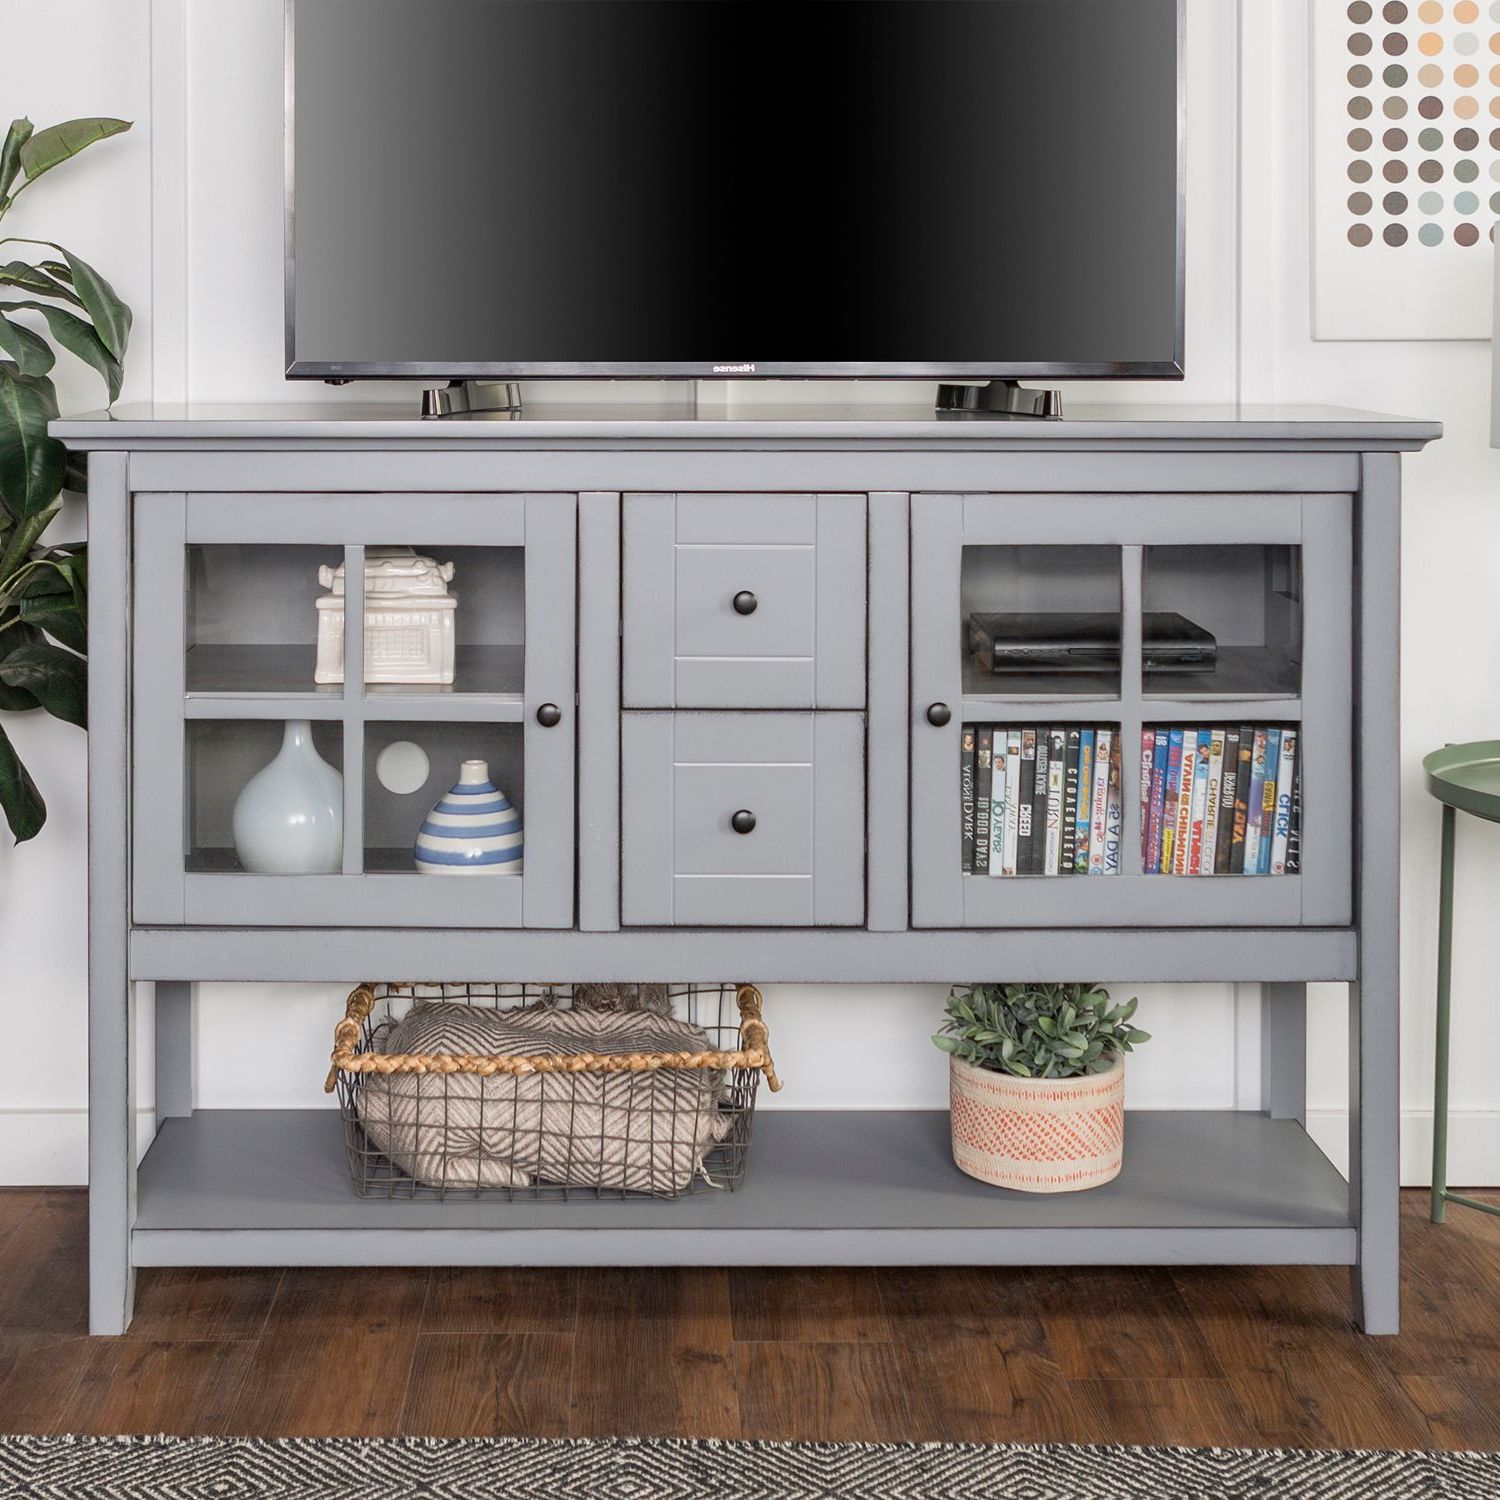 52" Antique Gray Tv Stand & Buffet | Living Room Tv Stand For Tv Stands With Table Storage Cabinet In Rustic Gray Wash (Gallery 4 of 20)